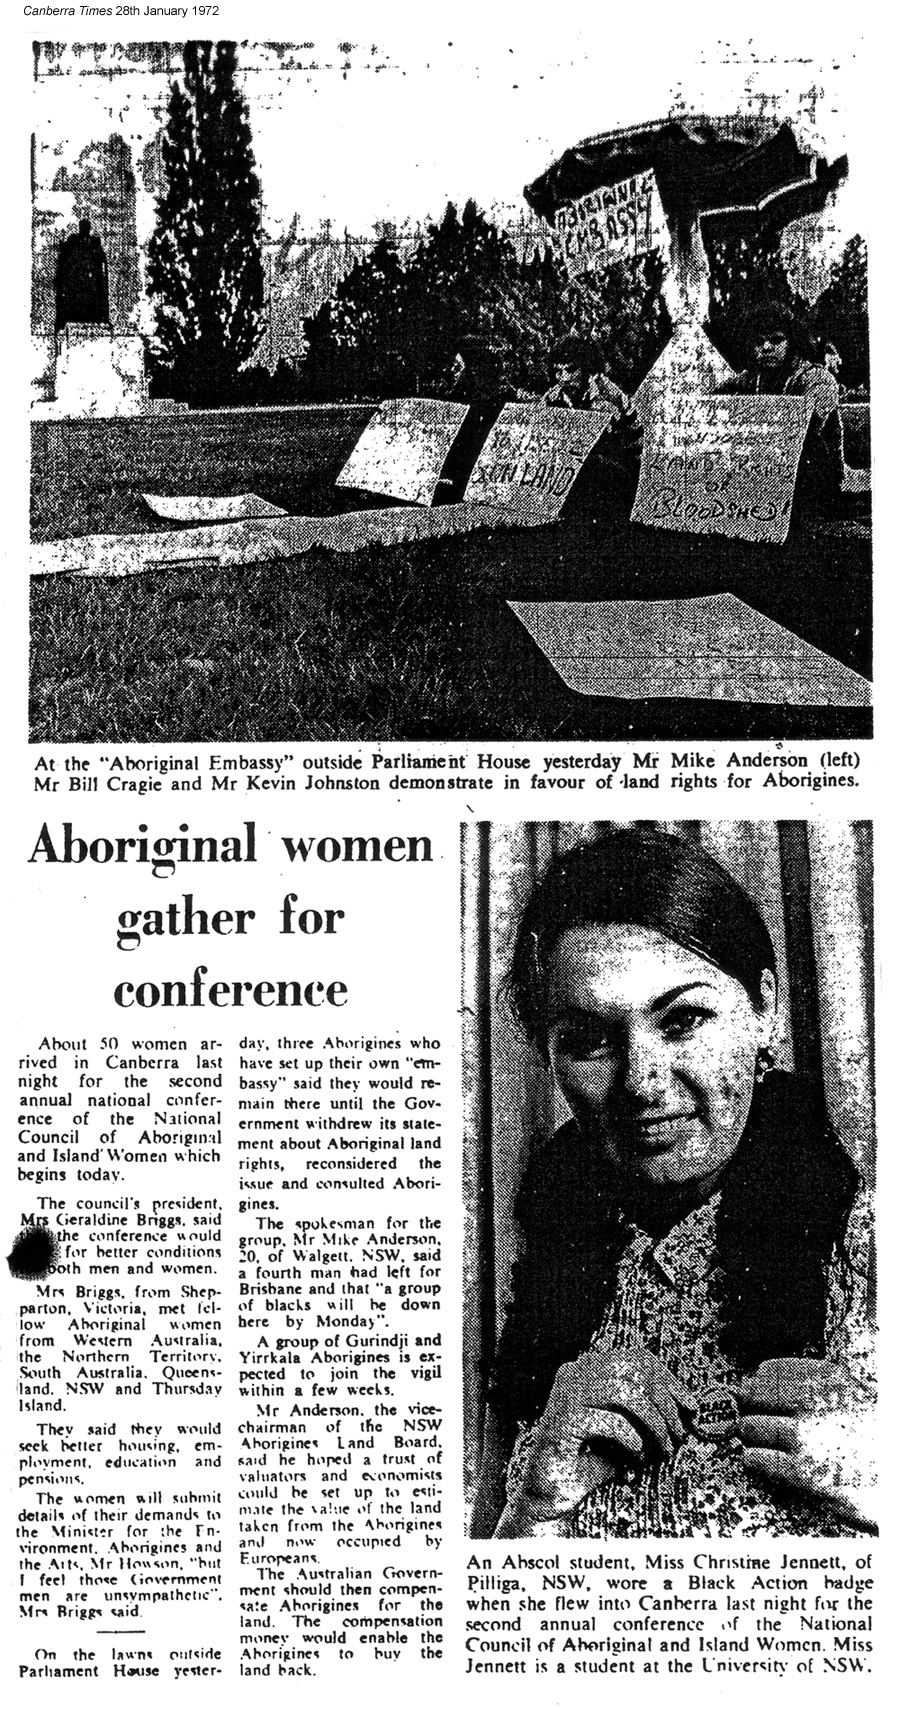 canberra times 28th january 1972